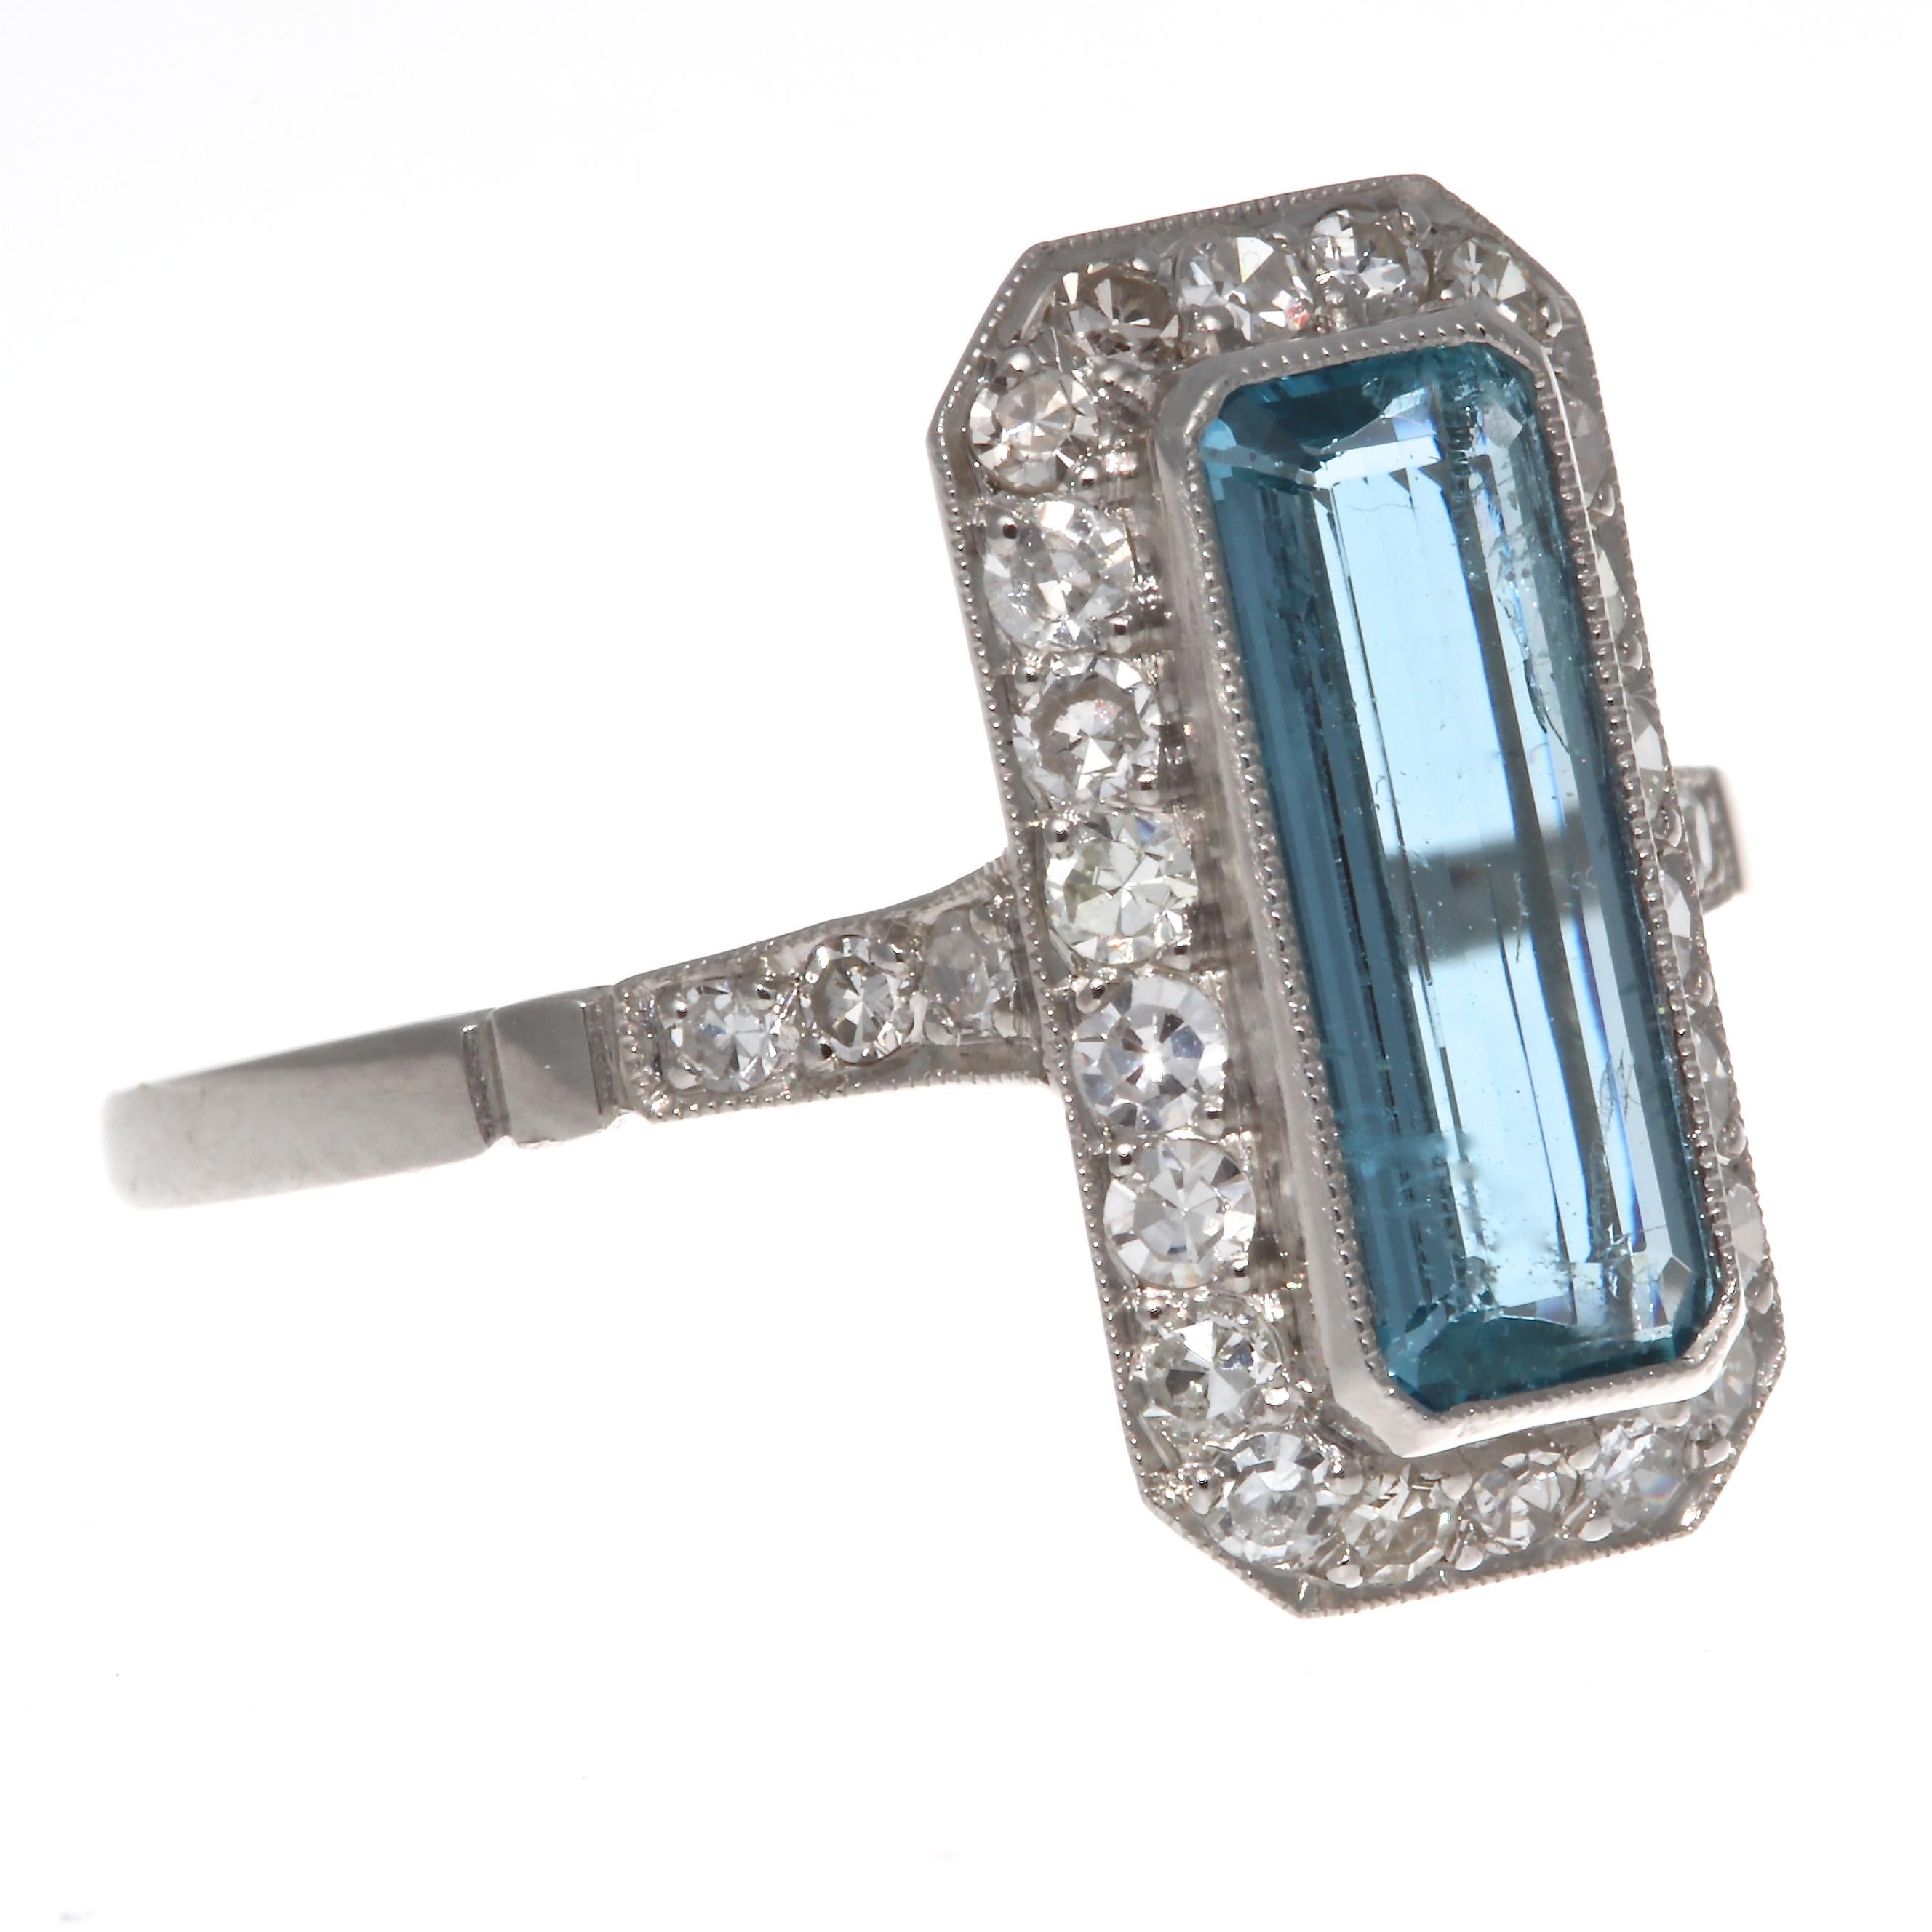 A shade in-between blue and green and one of the most soothing colors on the spectrum. It is believed to have magical powers and is known in ancient folklore as the treasure of mermaids. Featuring a 1.25 carat elongated emerald cut aquamarine that